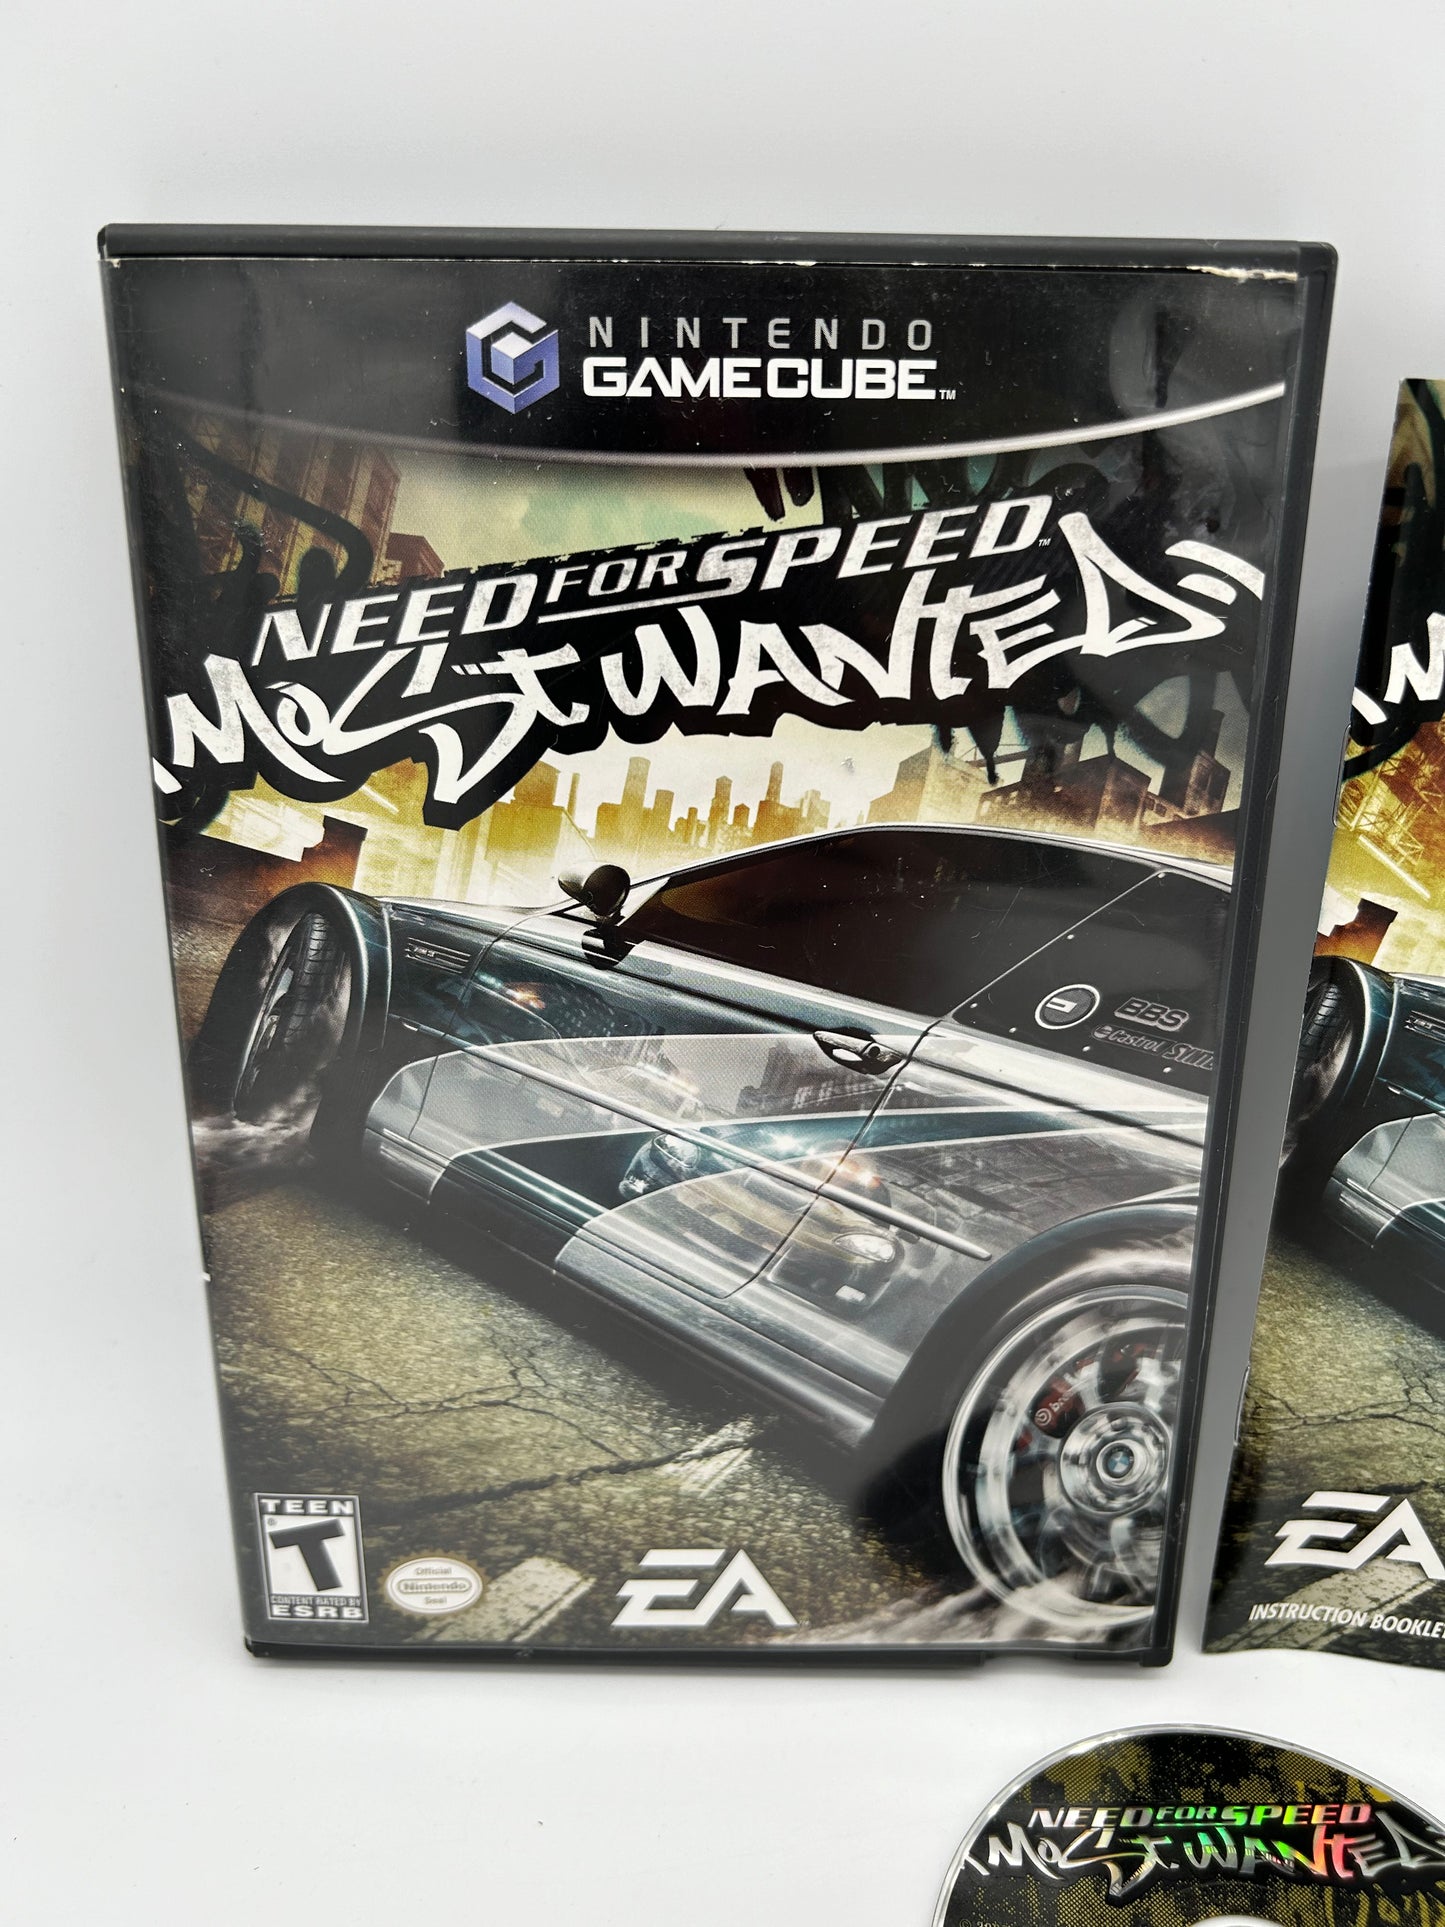 NiNTENDO GAMECUBE [NGC] | NEED FOR SPEED MOST WANTED